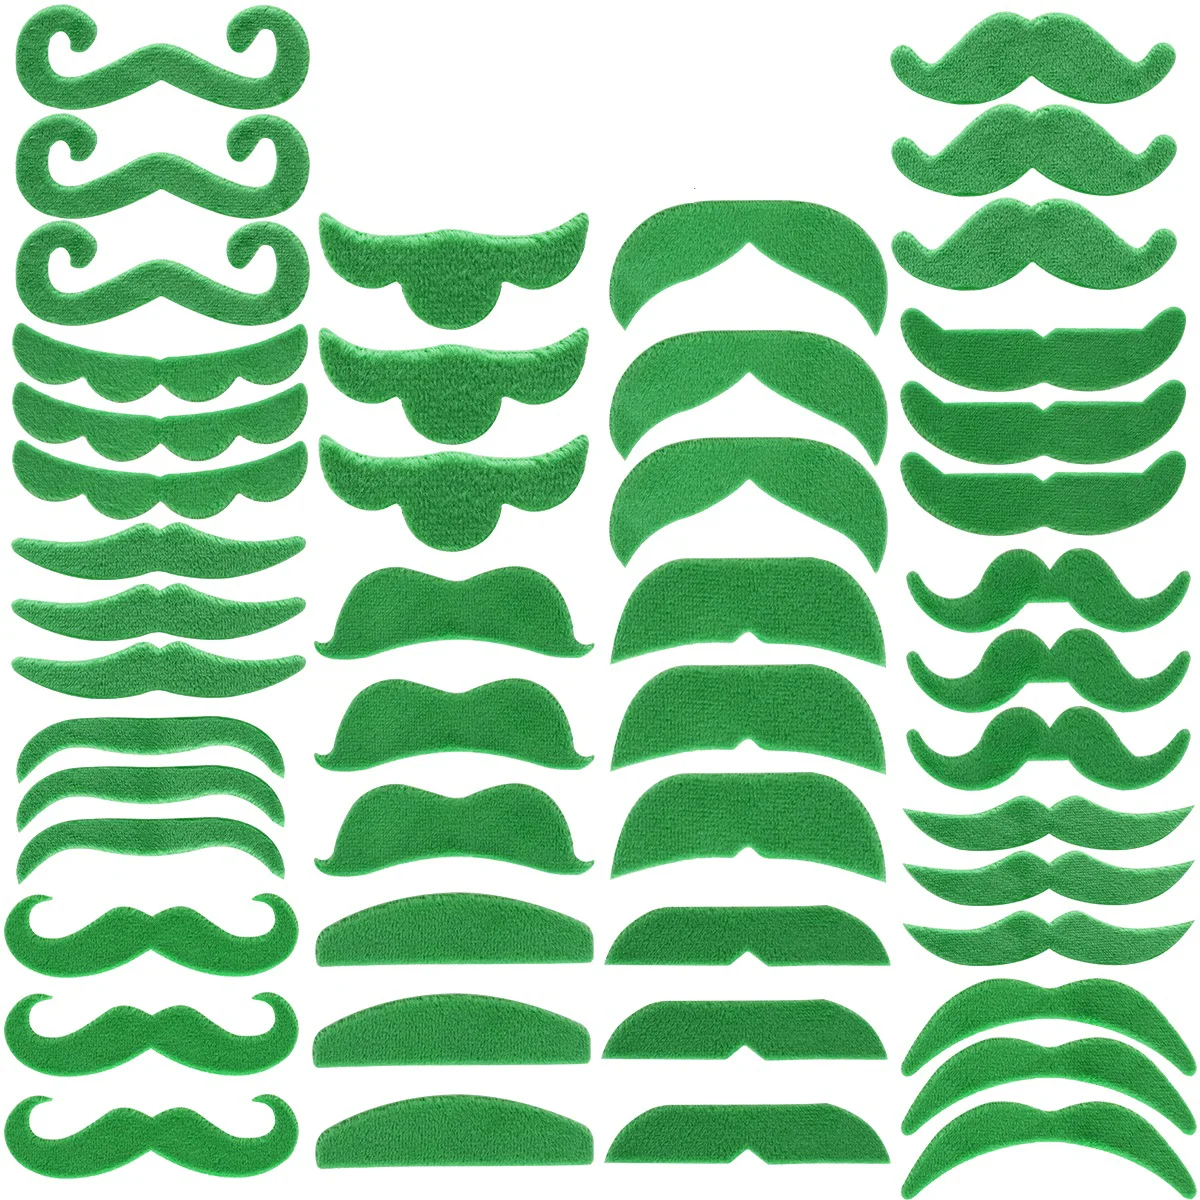 

TINKSKY 48 Pcs Self Adhesive Green Fake Mustache Plush Moustache ostume Party Face Accessory Party Prop for St Patrick's Day